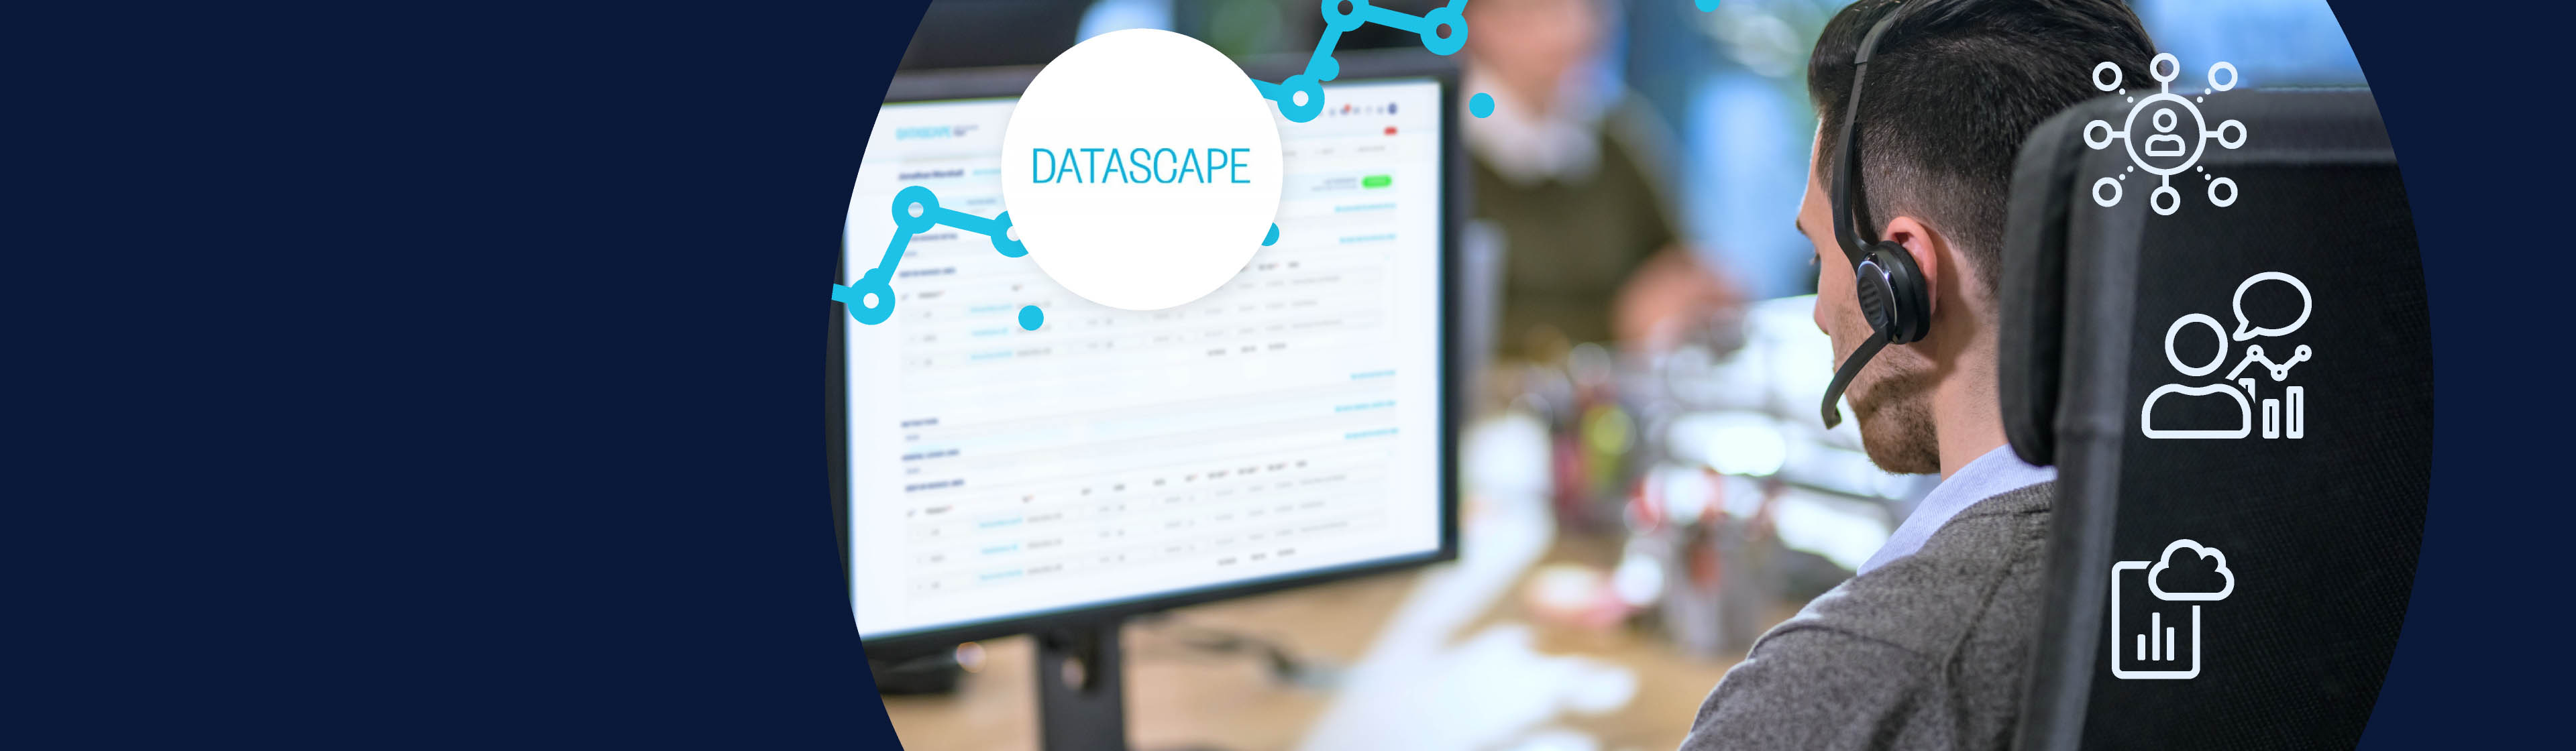 Datascape CRM hero image